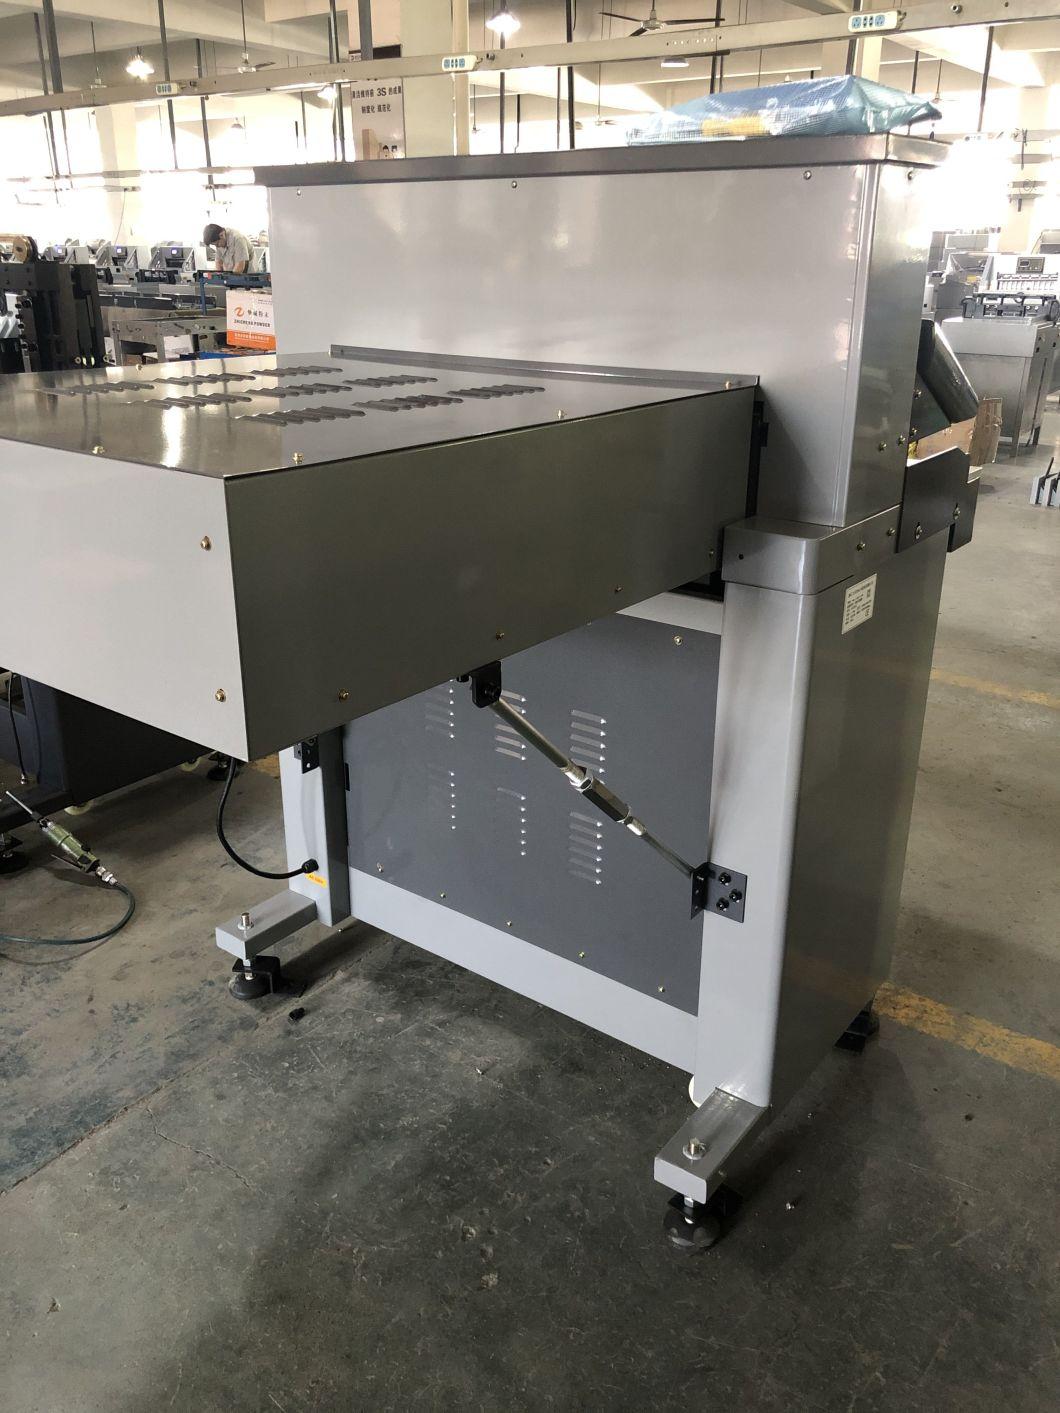 520mm Double Hydraulic Auto Guillotine Straight Paper Cutter